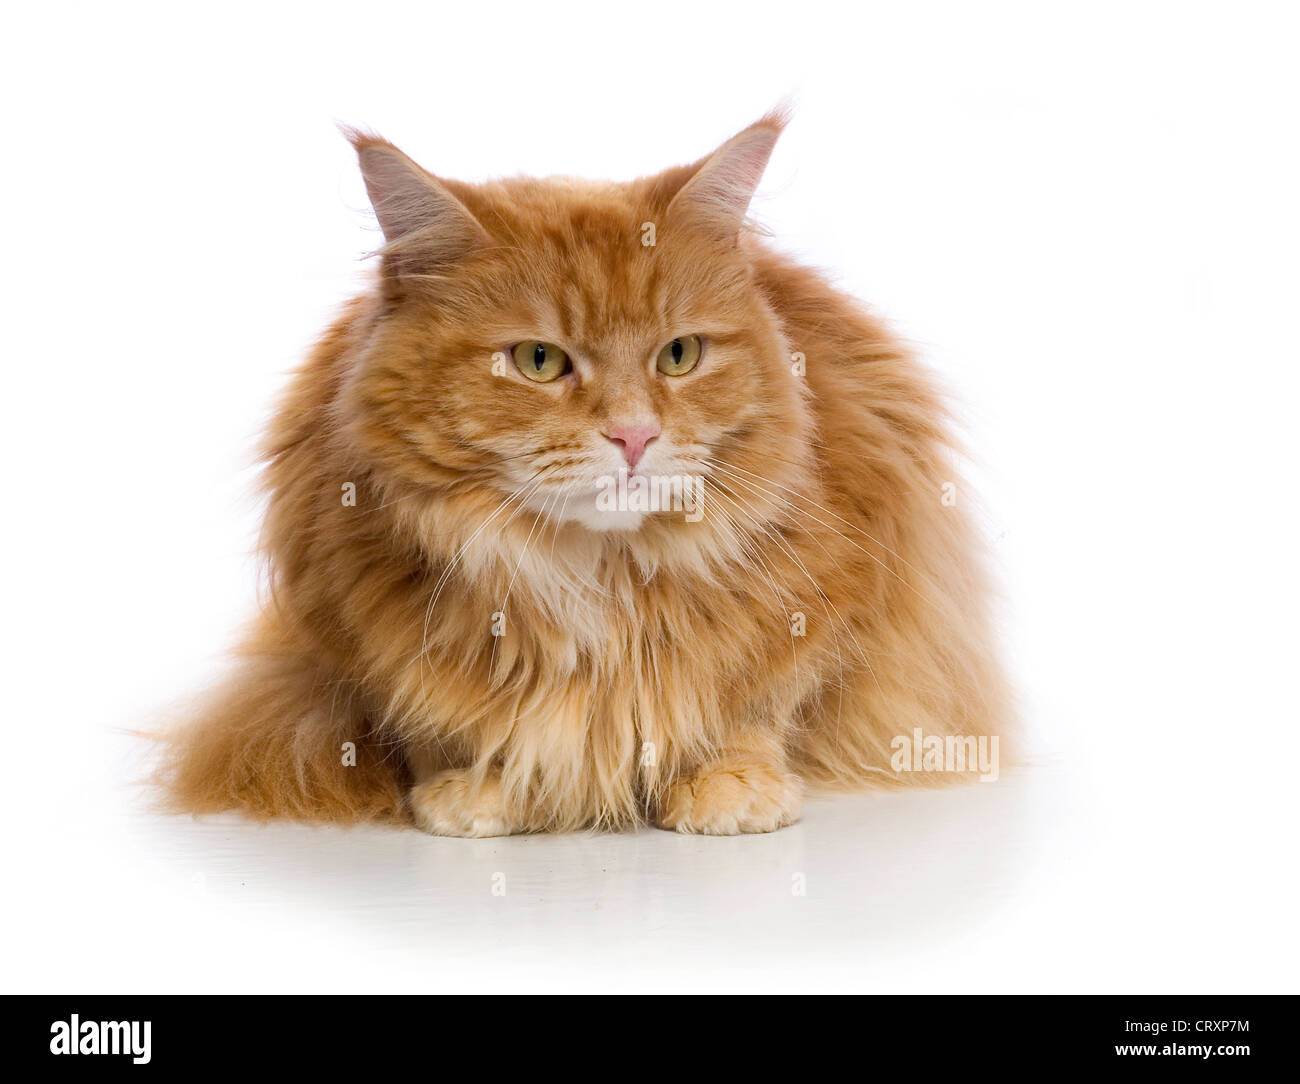 Le gingembre cat sitting on white background Banque D'Images